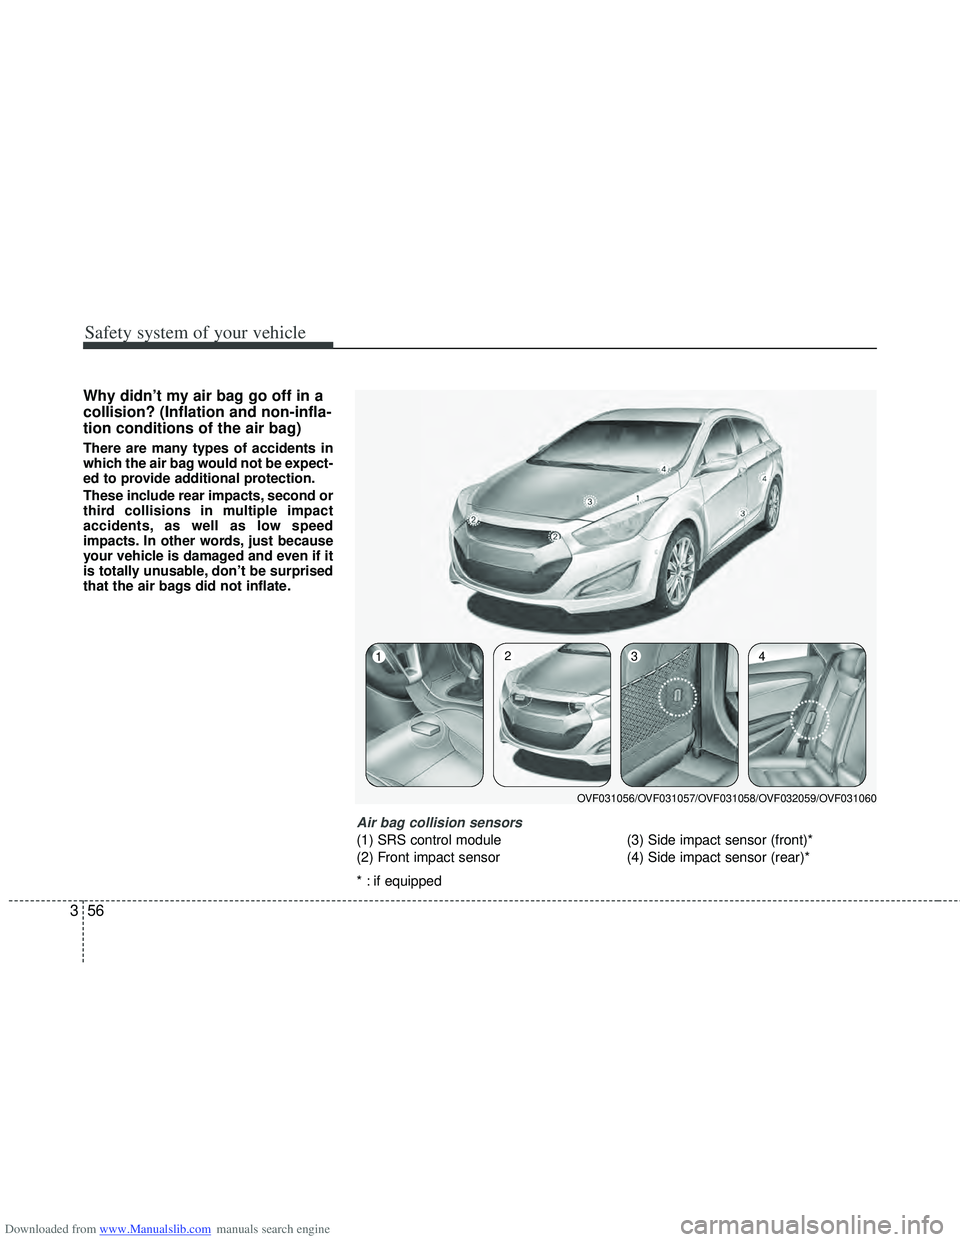 HYUNDAI I40 2013  Owners Manual Downloaded from www.Manualslib.com manuals search engine Safety system of your vehicle
56
3
Why didn’t my air bag go off in a
collision? (Inflation and non-infla-
tion conditions of the air bag)
The